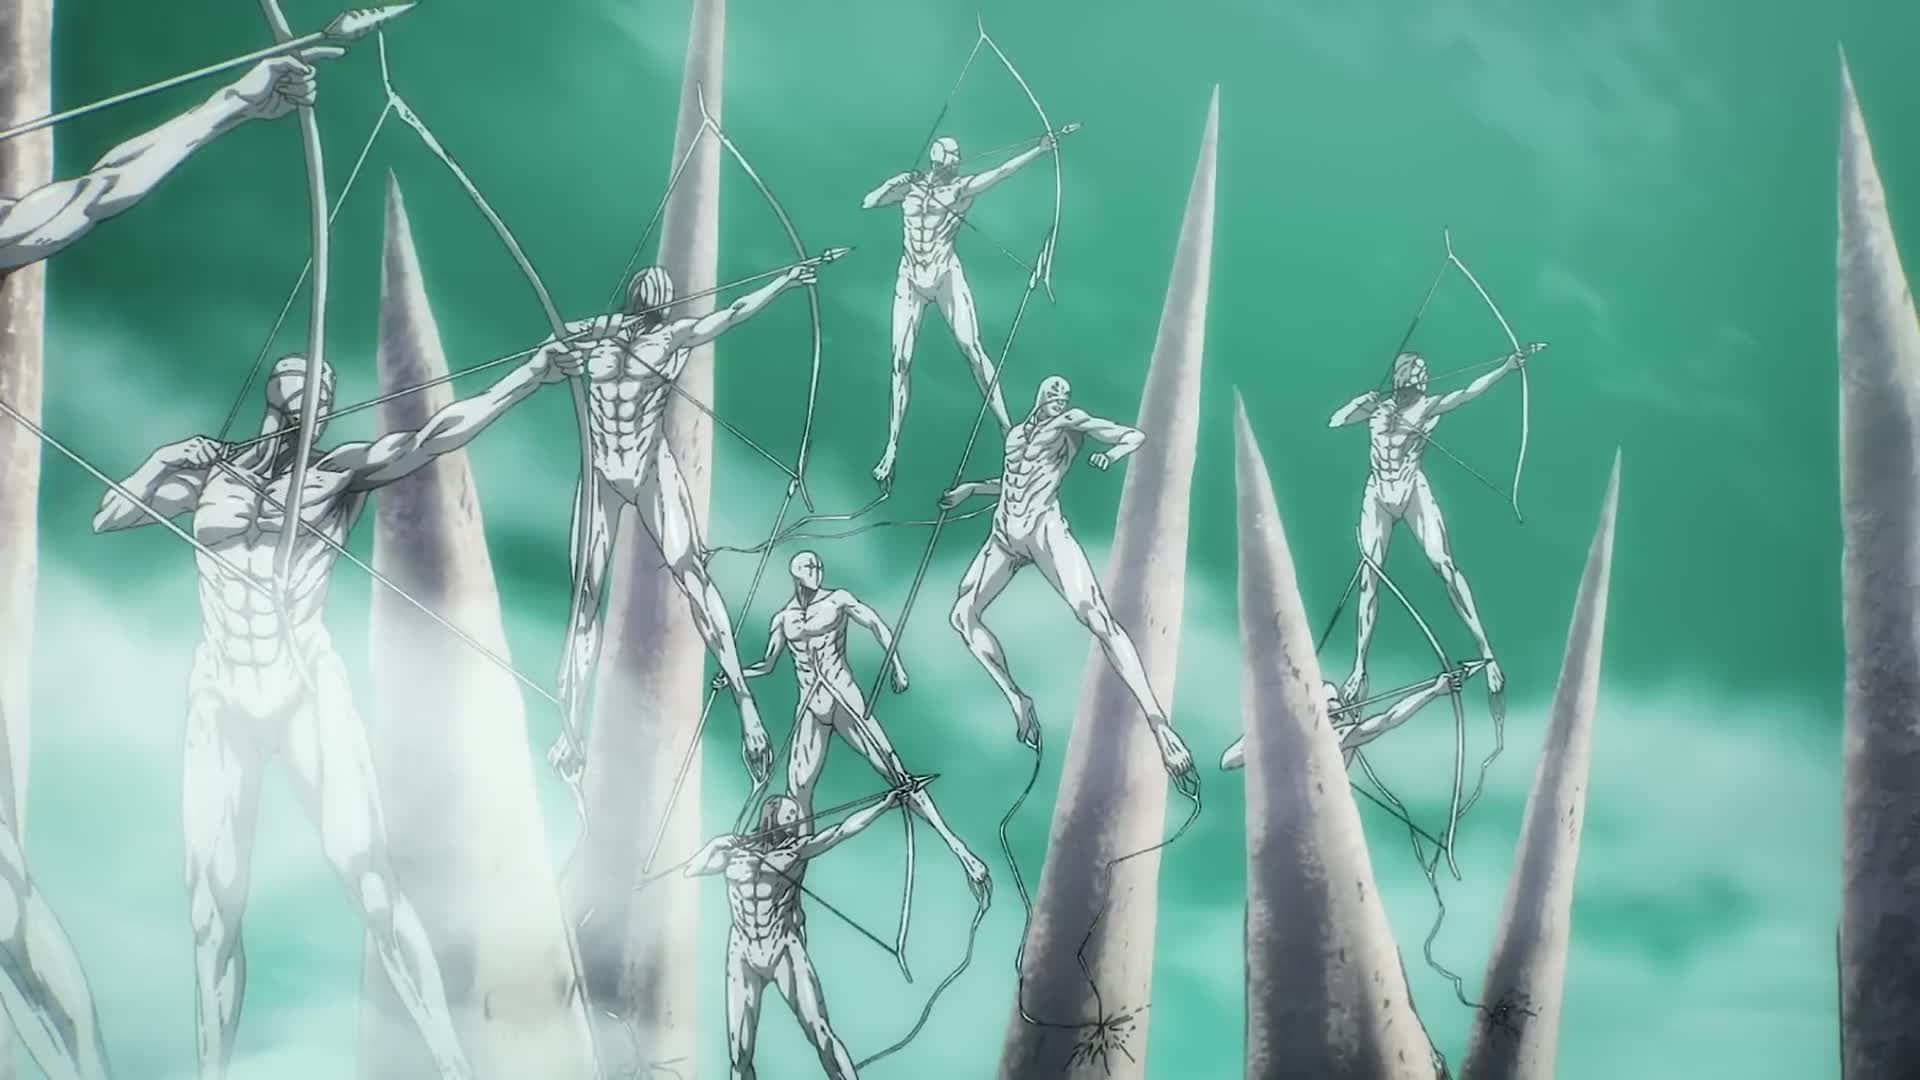 Attack on Titan creator reveals why he had to give up on happy